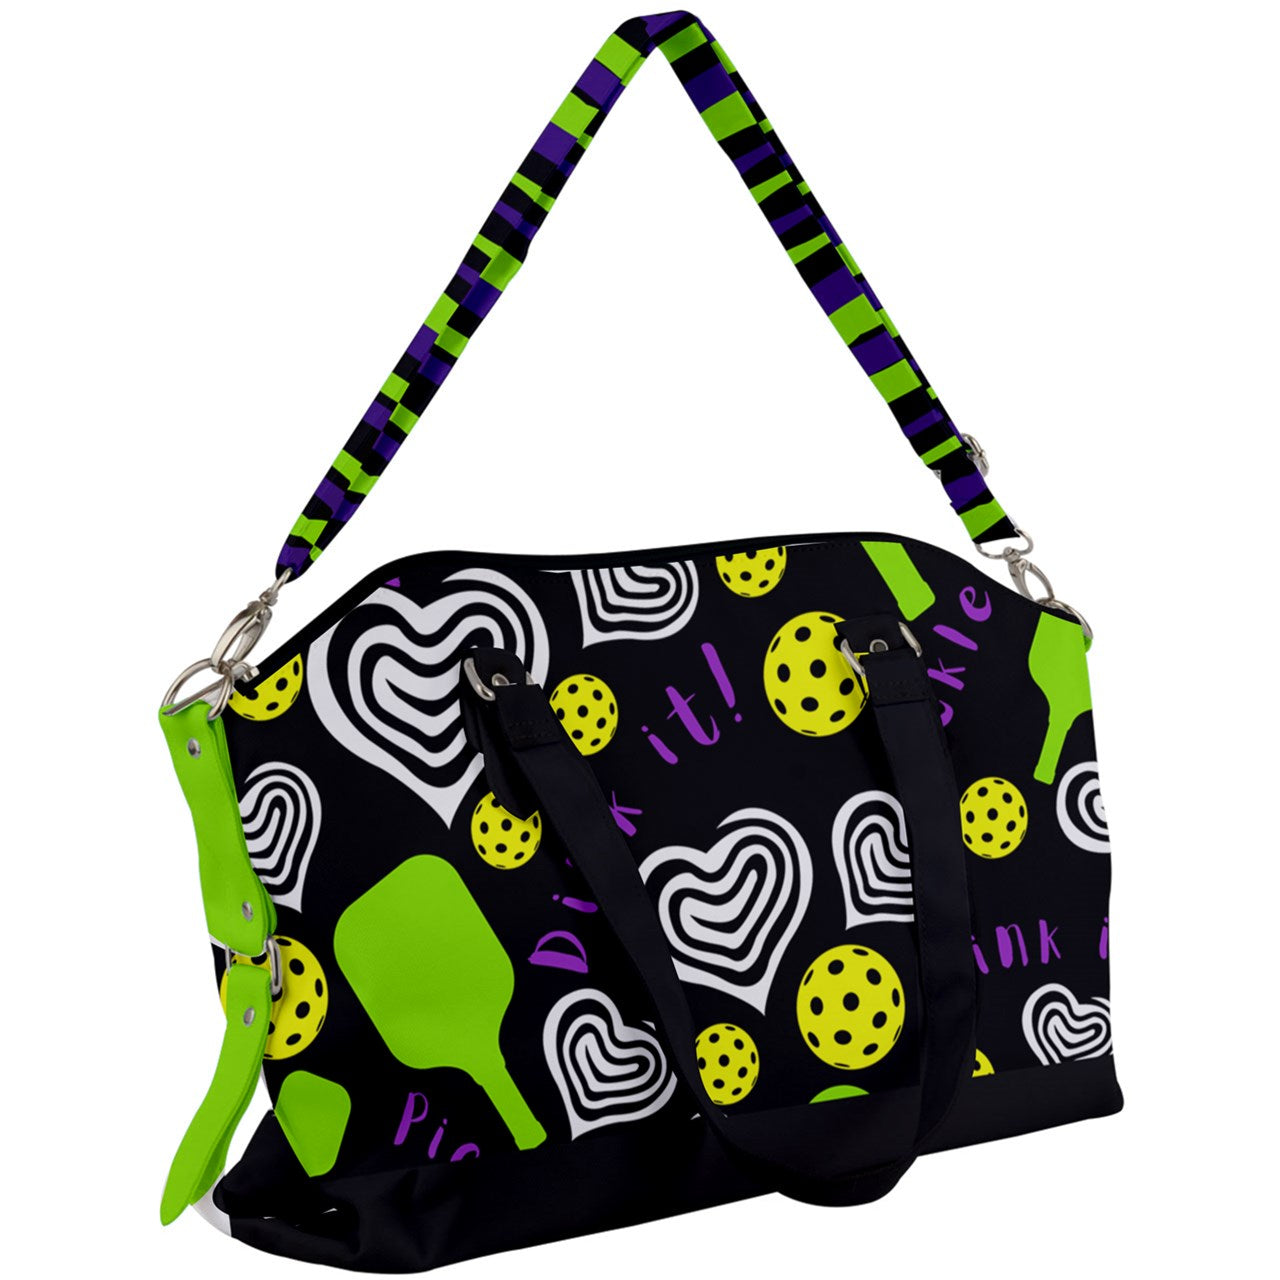 Dinking Diva Hearts - Black - Canvas Crossbody Bag by Dizzy Pickle